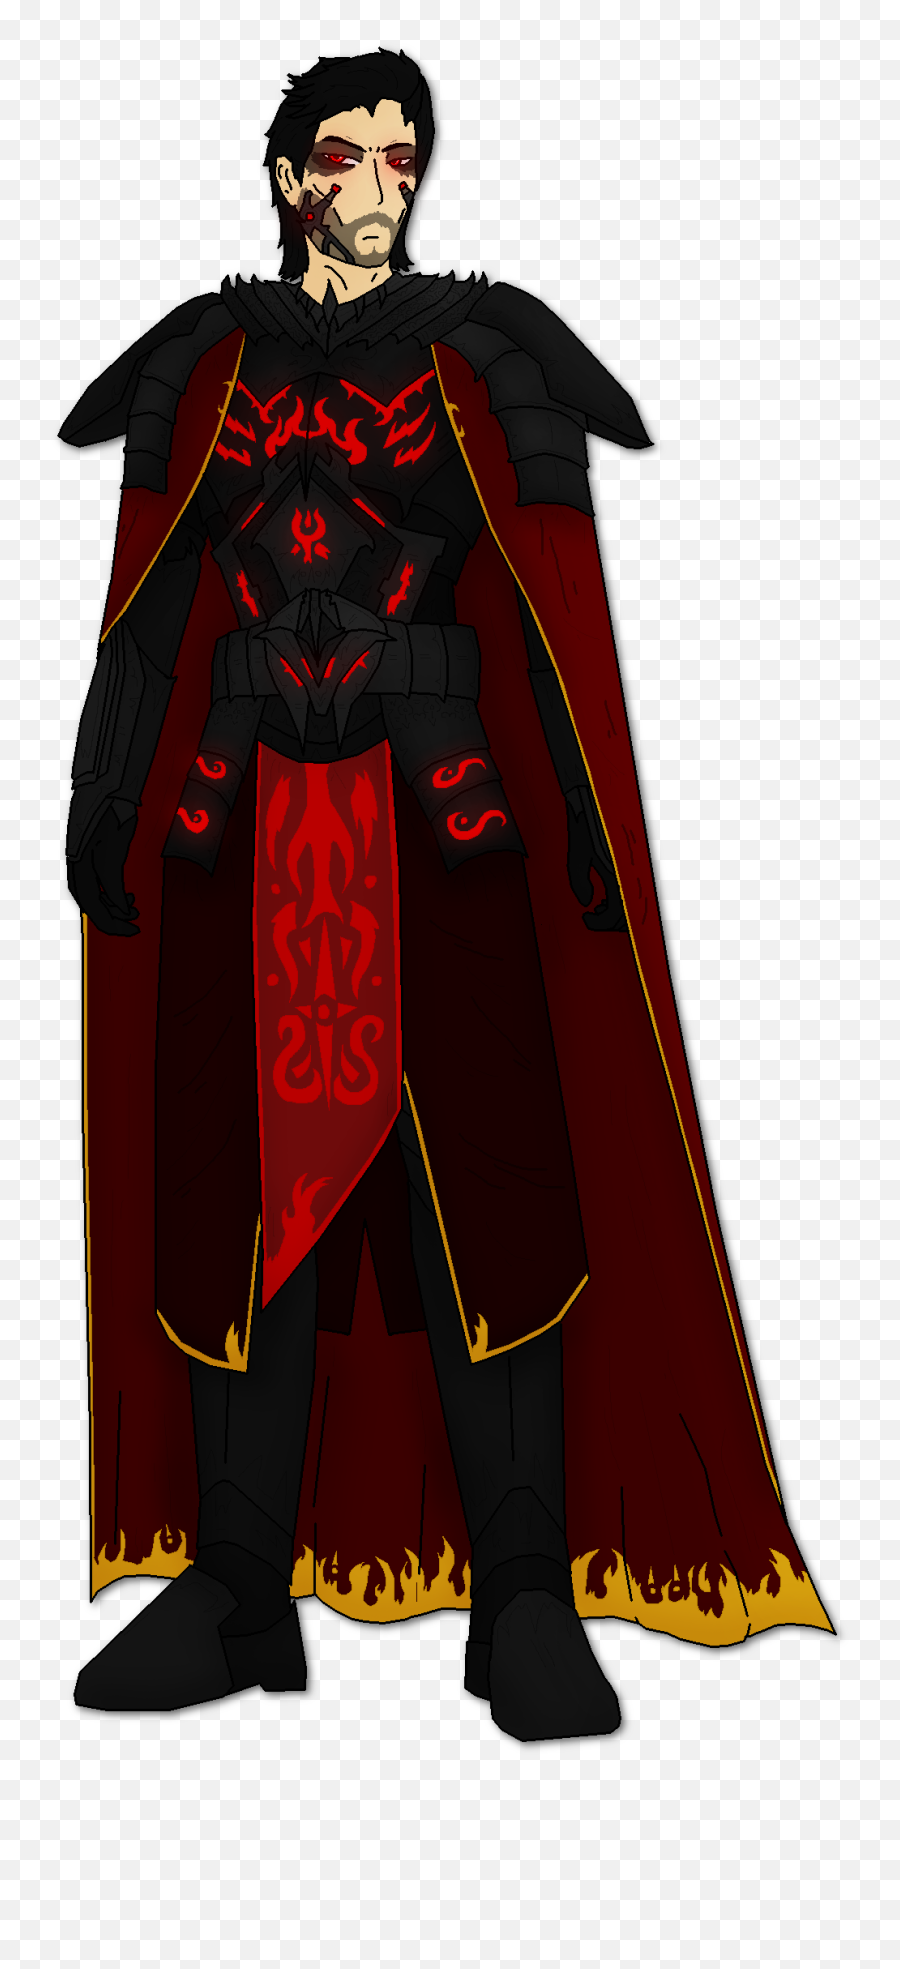 Emperor Png - Add Media Report Rss Emperor Tairous Cape Illustration,Cape Png